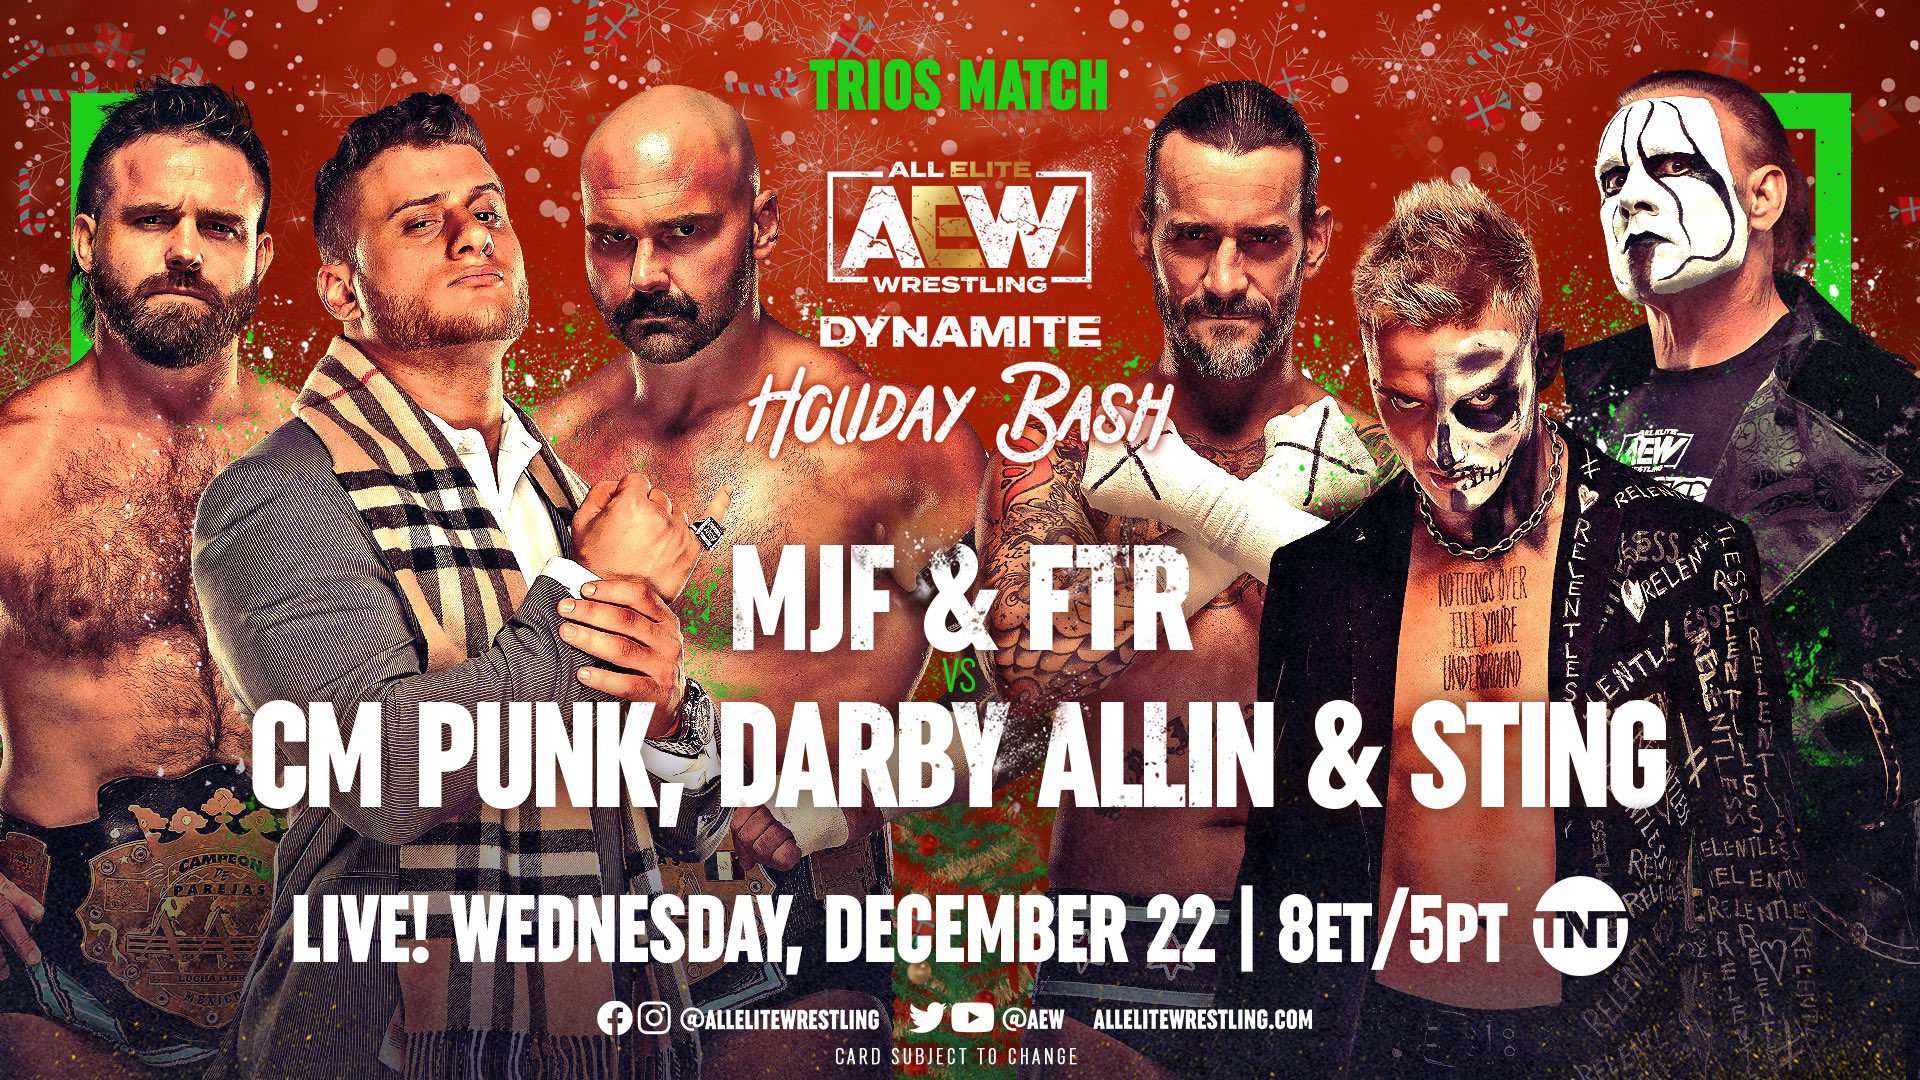 AEW Dynamite “Holiday Bash” Results for December 22, 2021